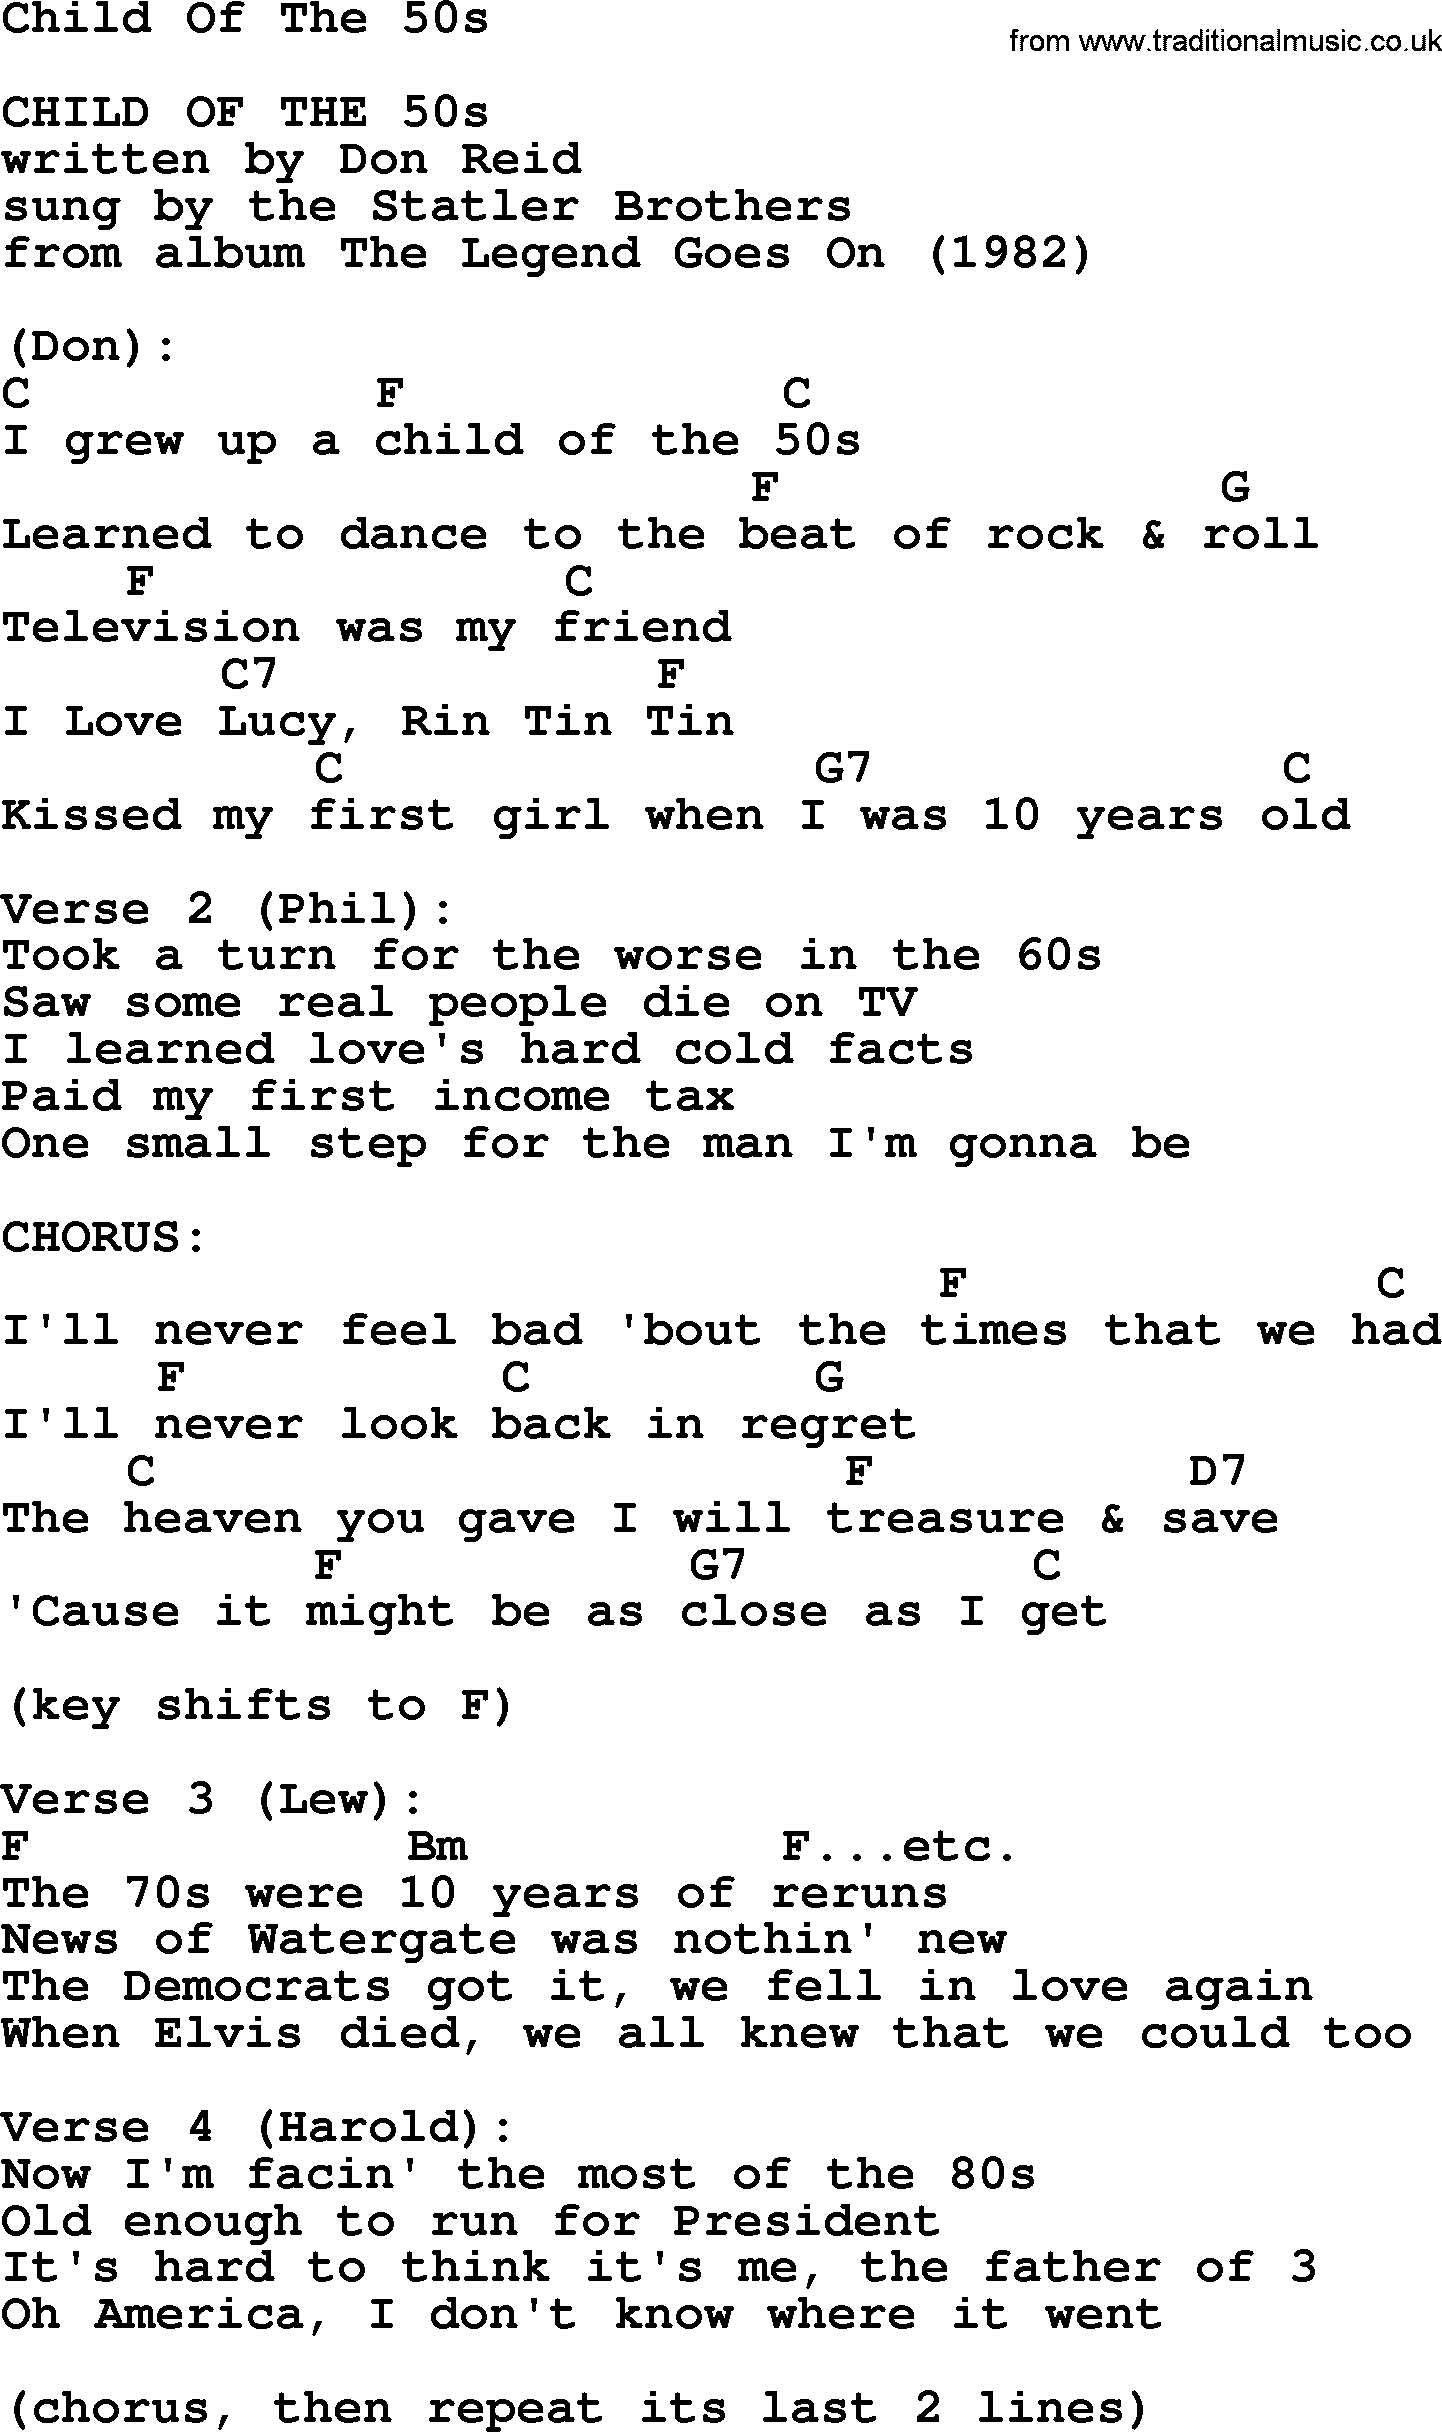 Bluegrass song: Child Of The 50s, lyrics and chords